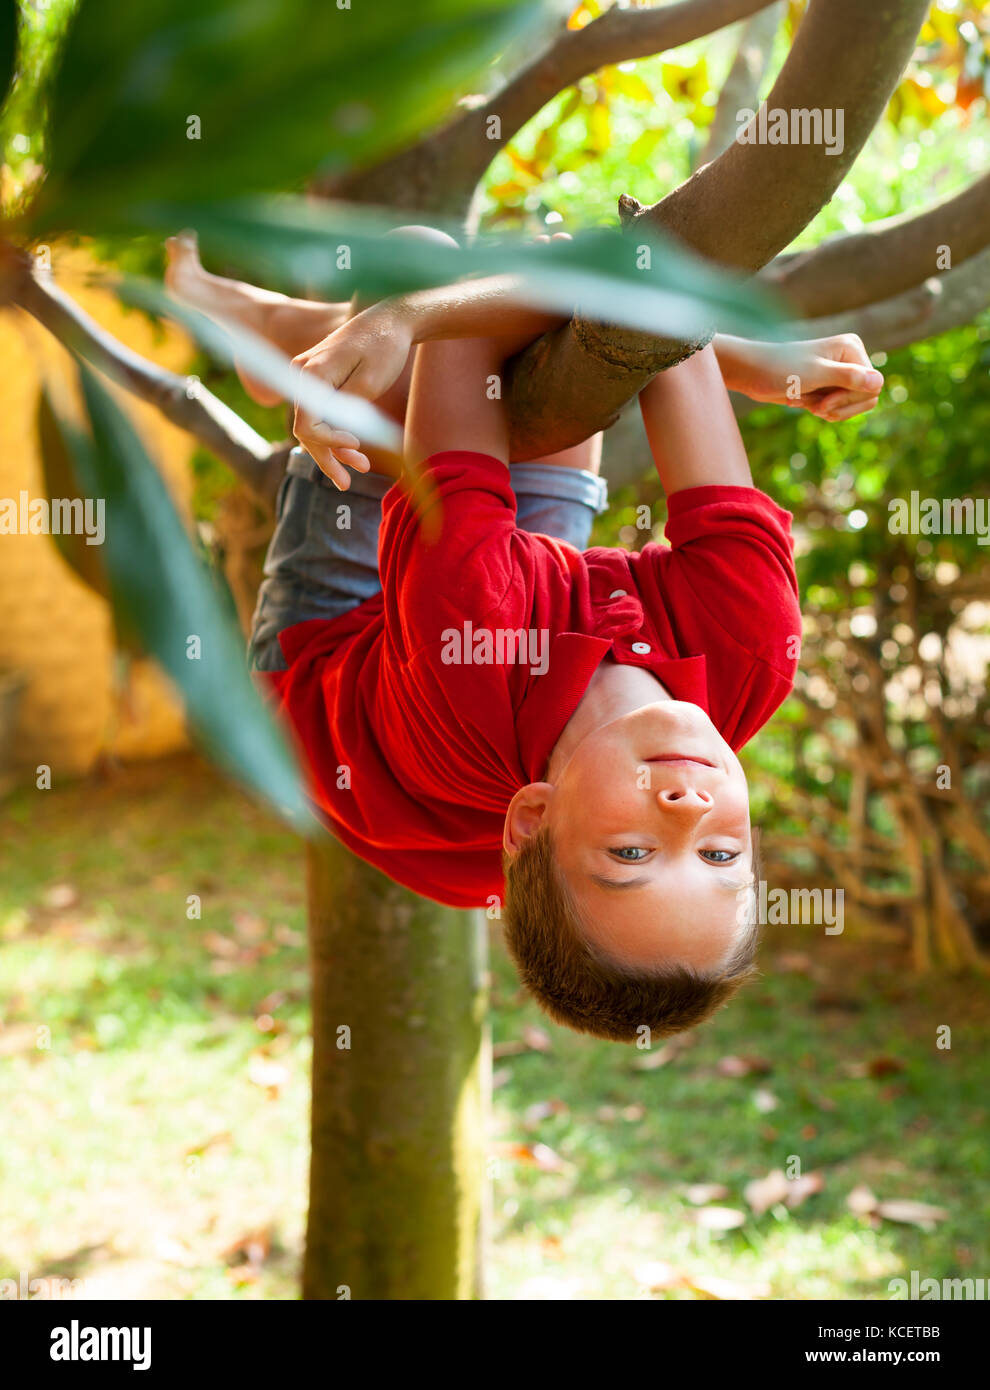 Boy hanging from a tree branch in a summer garden Stock Photo